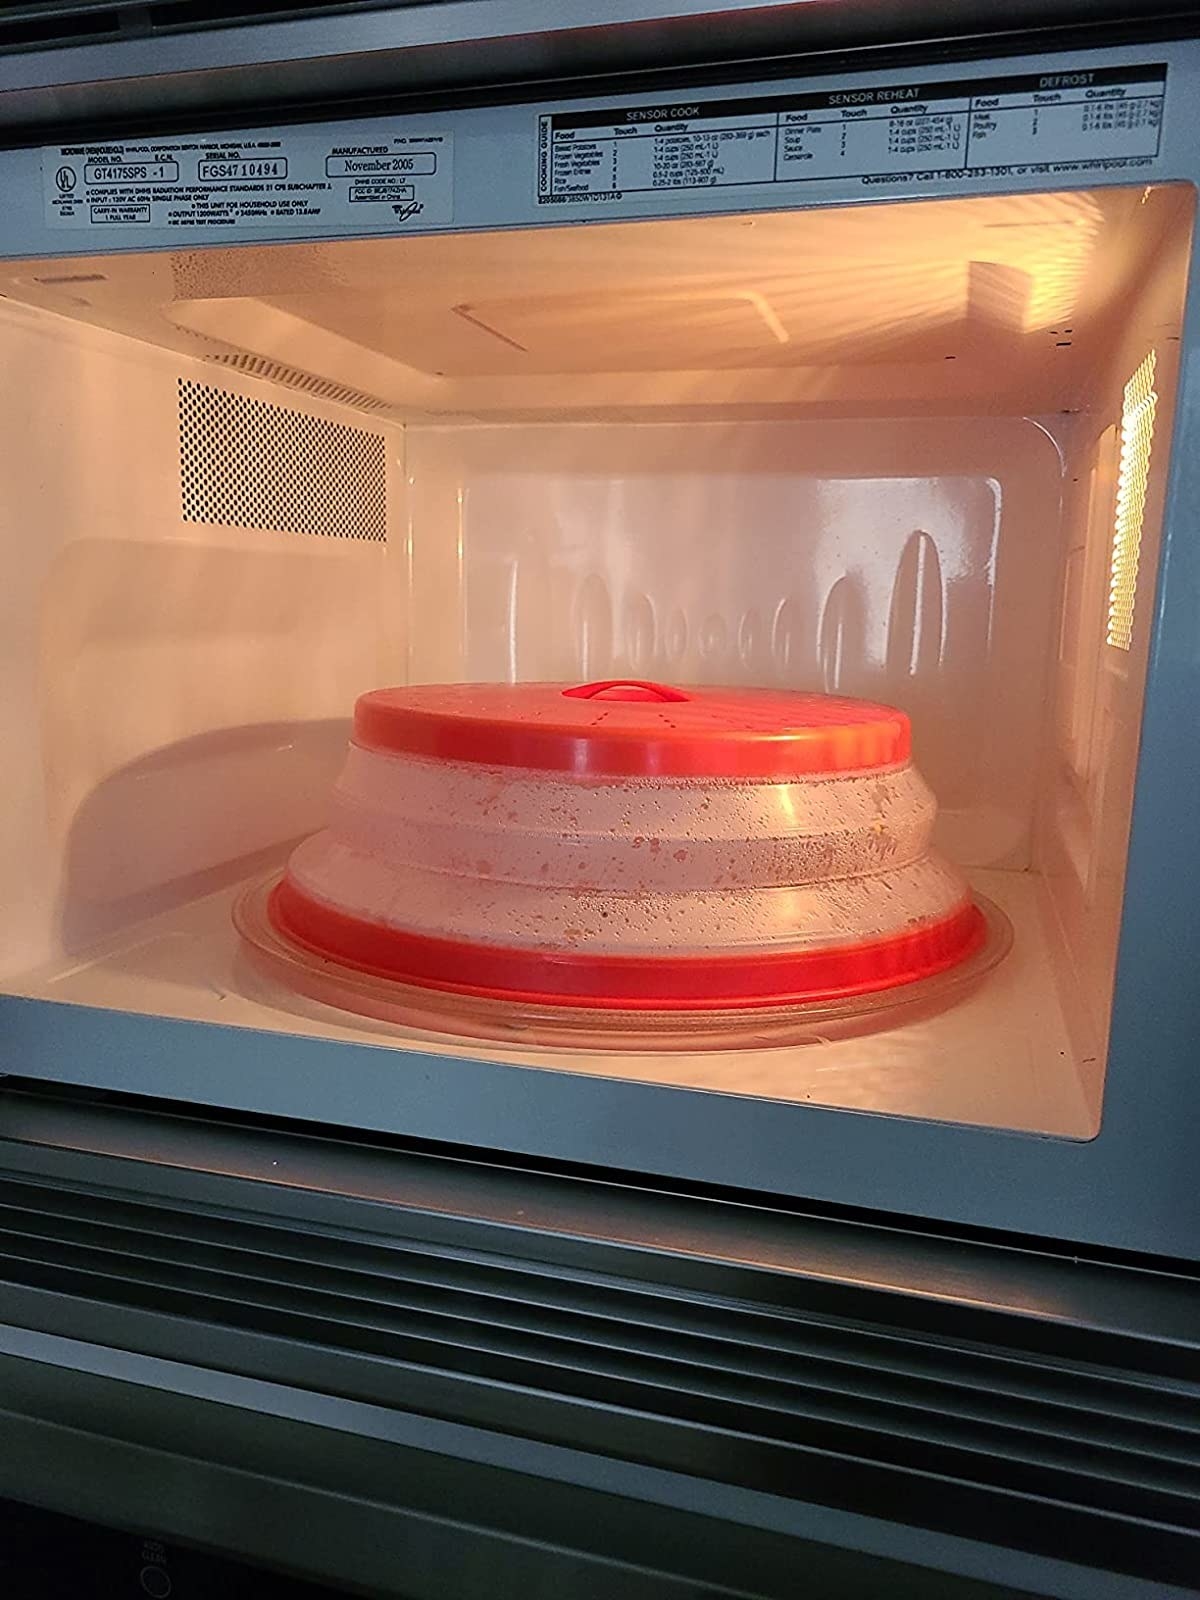 Reviewer image of red cover inside a microwave